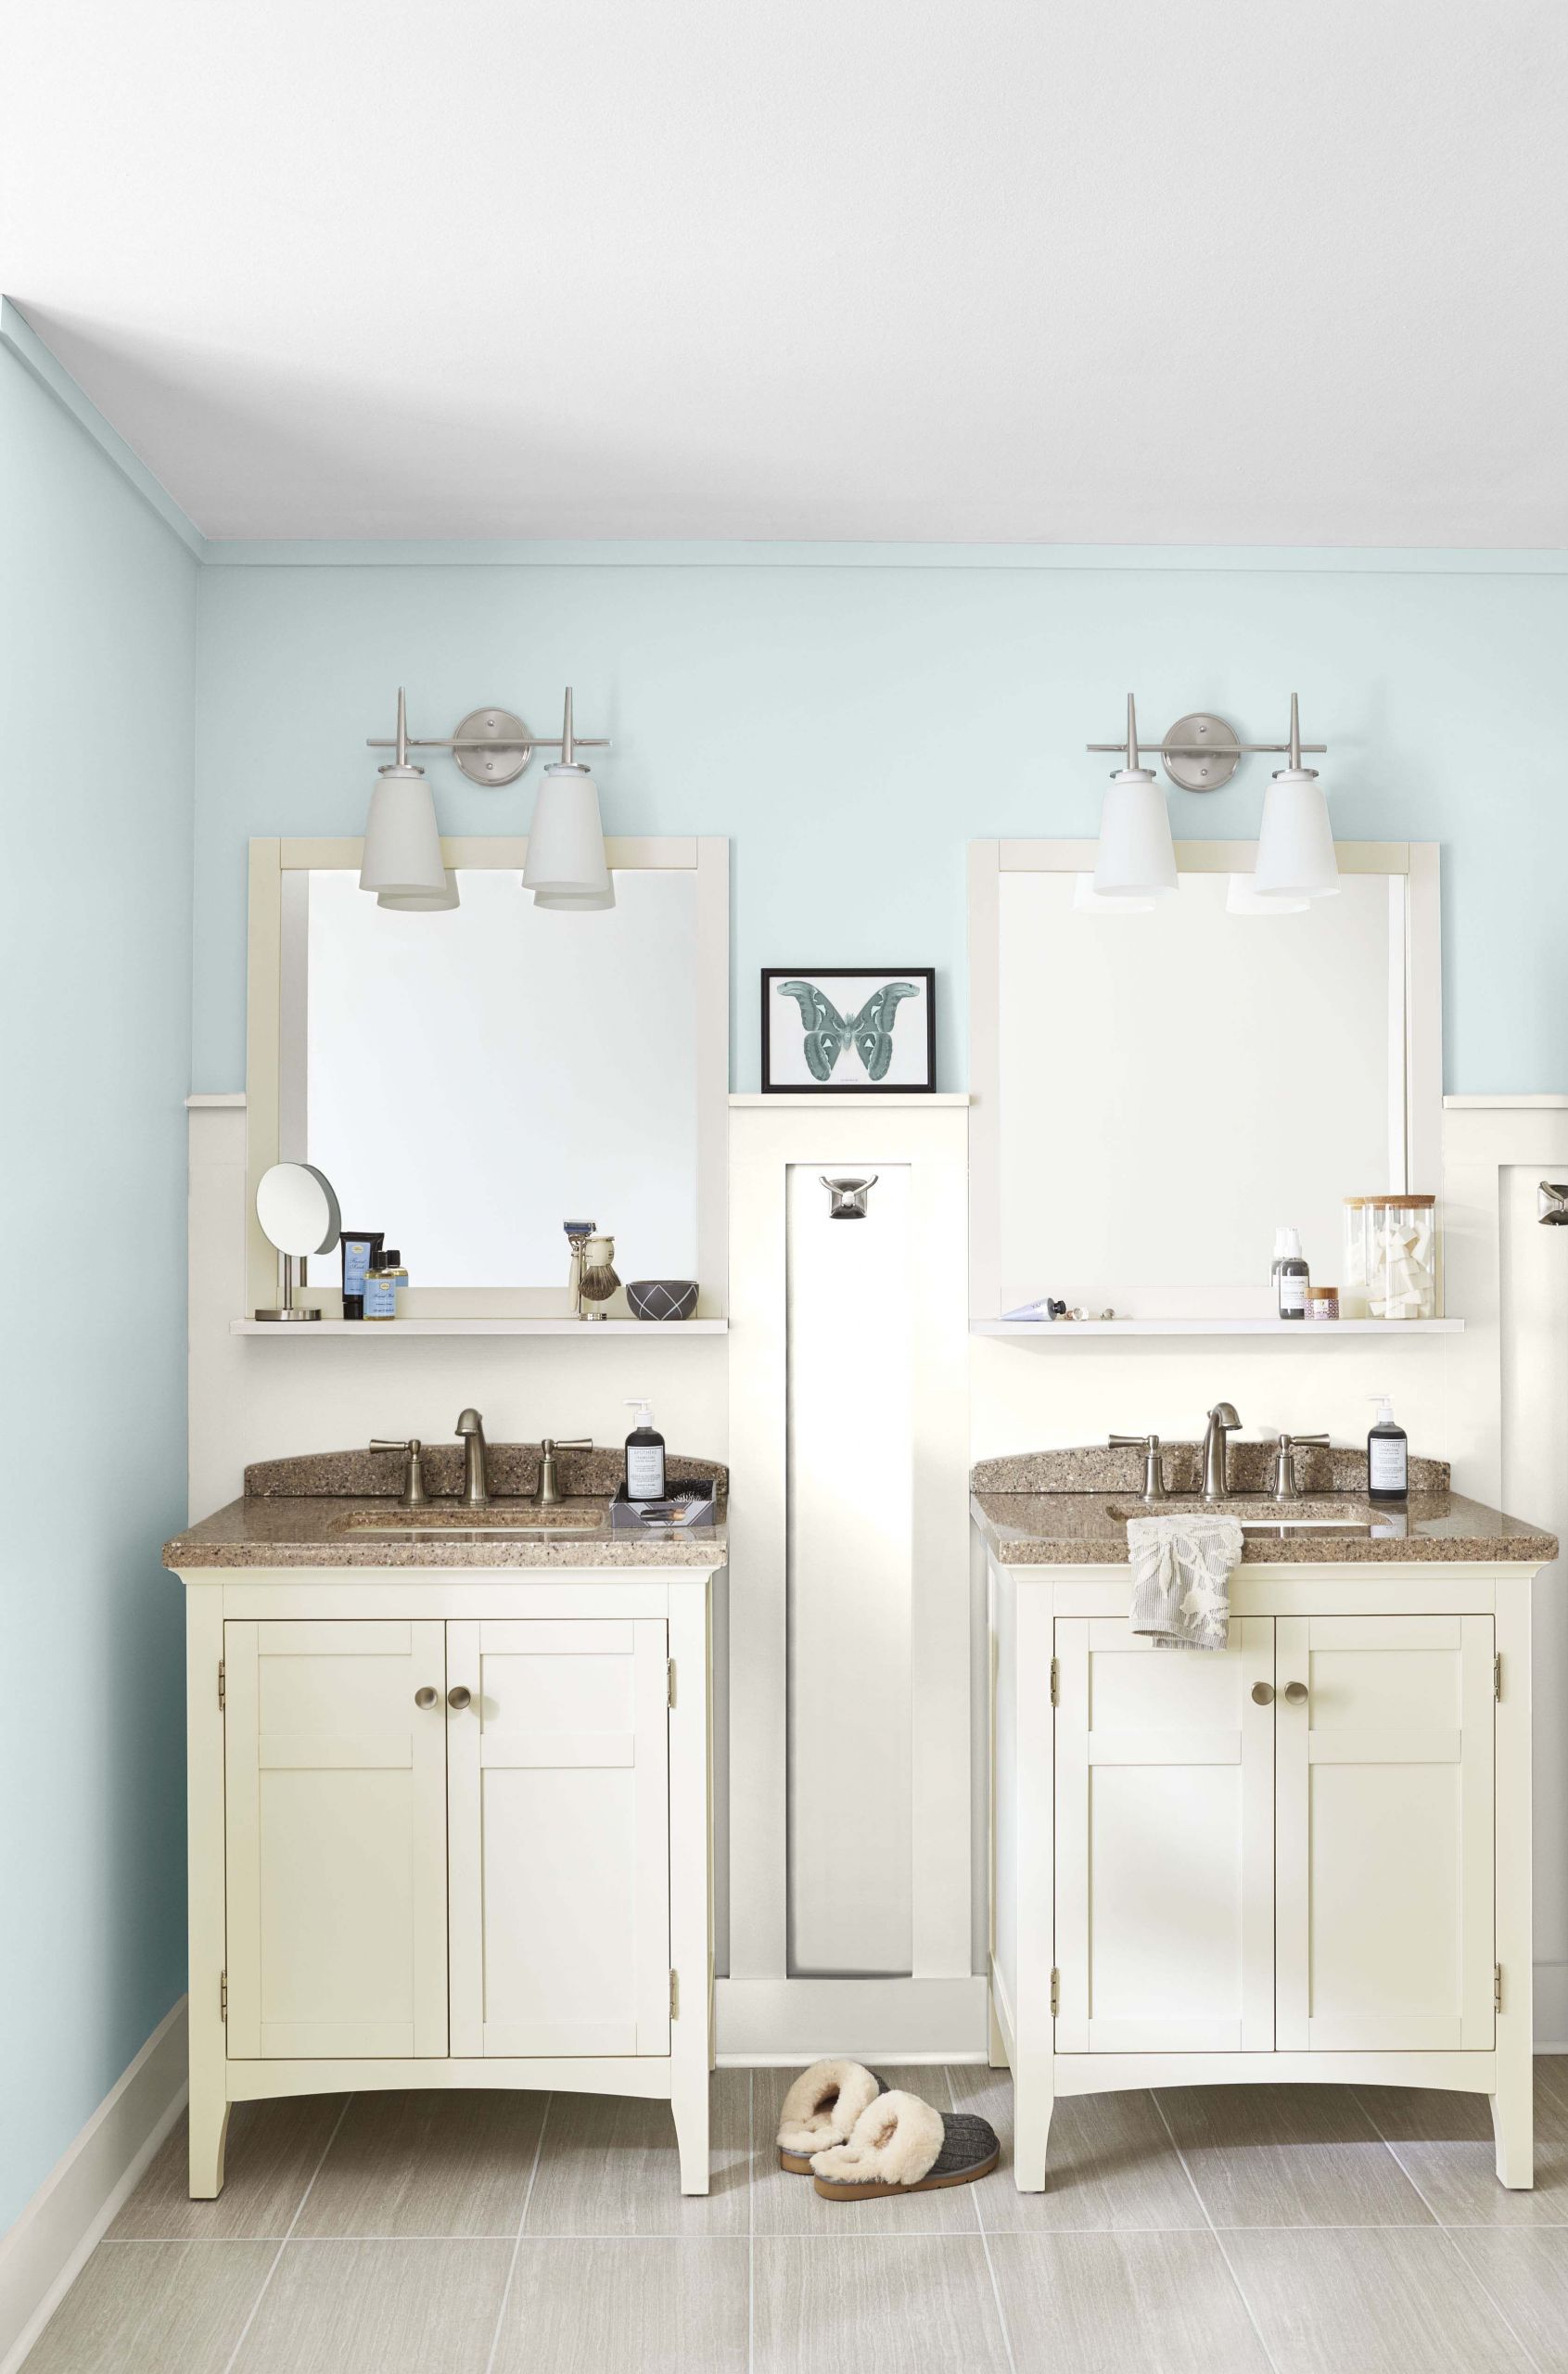 Lowes Bathroom Design Ideas
 Let Lowe’s design and installation experts help you style